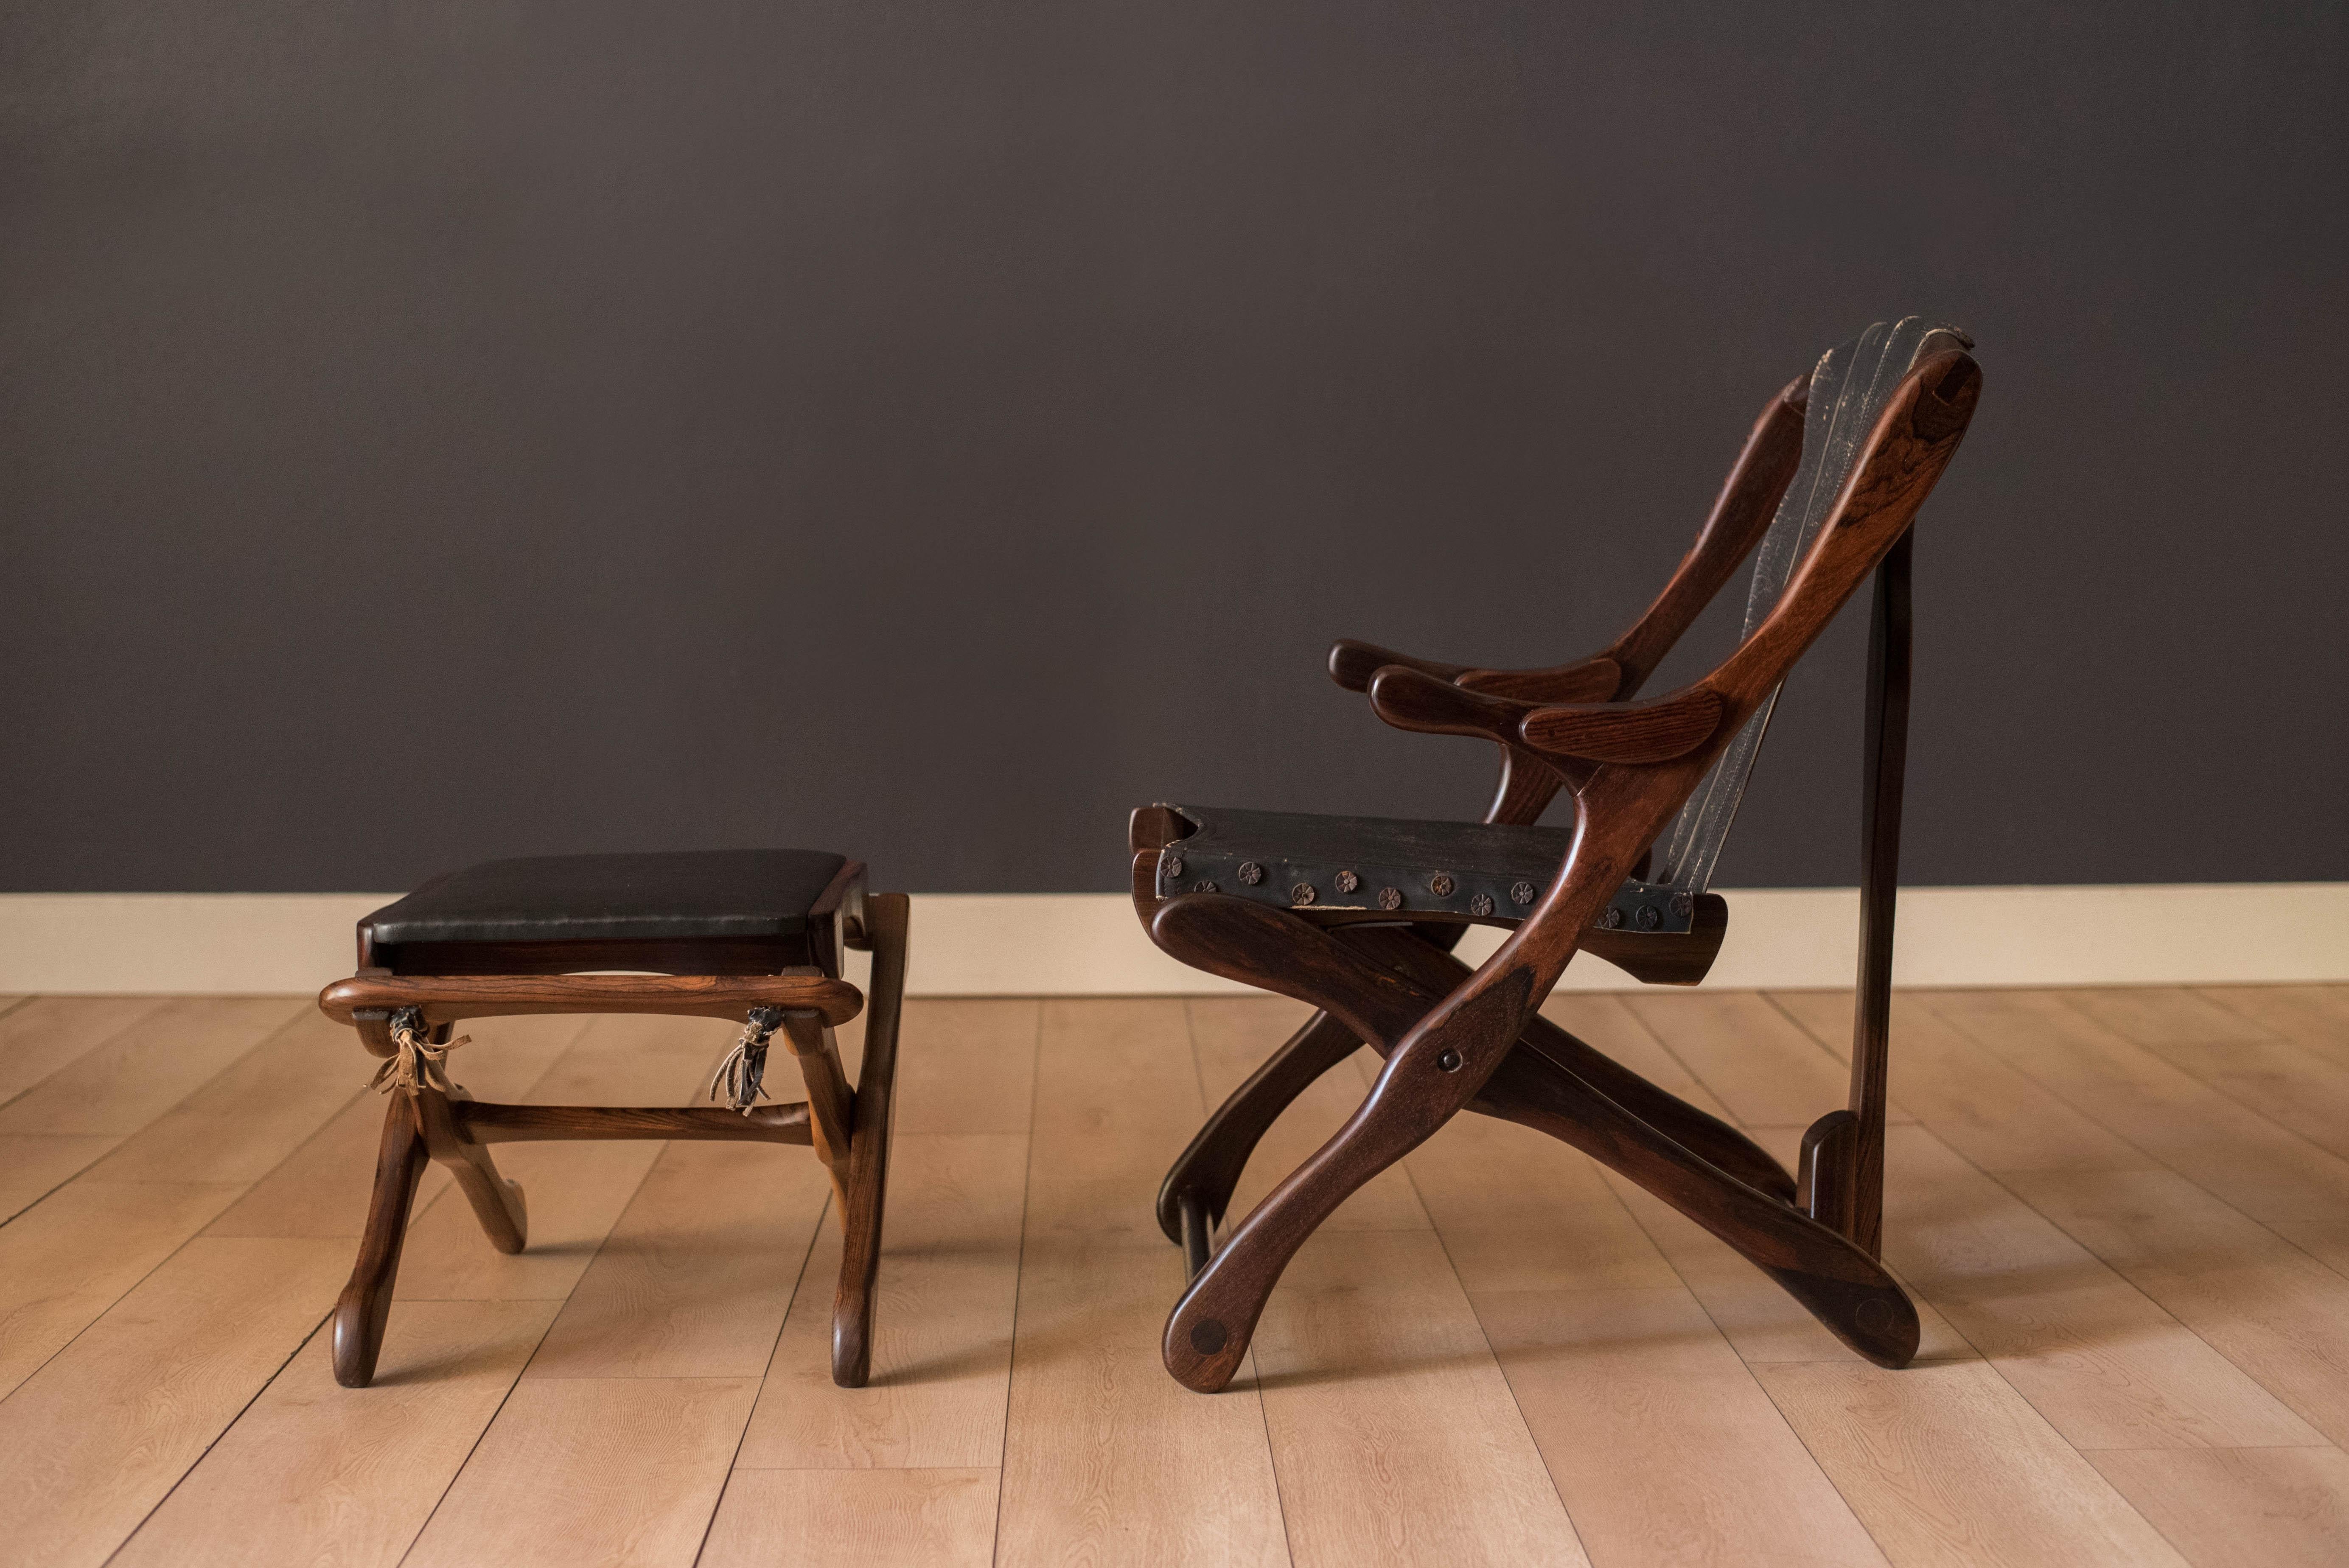 Mid-Century Modern leather sling lounge chair and ottoman designed by Don Shoemaker in cocobolo rosewood manufactured by Senal S.A., Mexico. This sculptural set features flowing rosewood grains and contrasting wood joinery. Equipped with folding